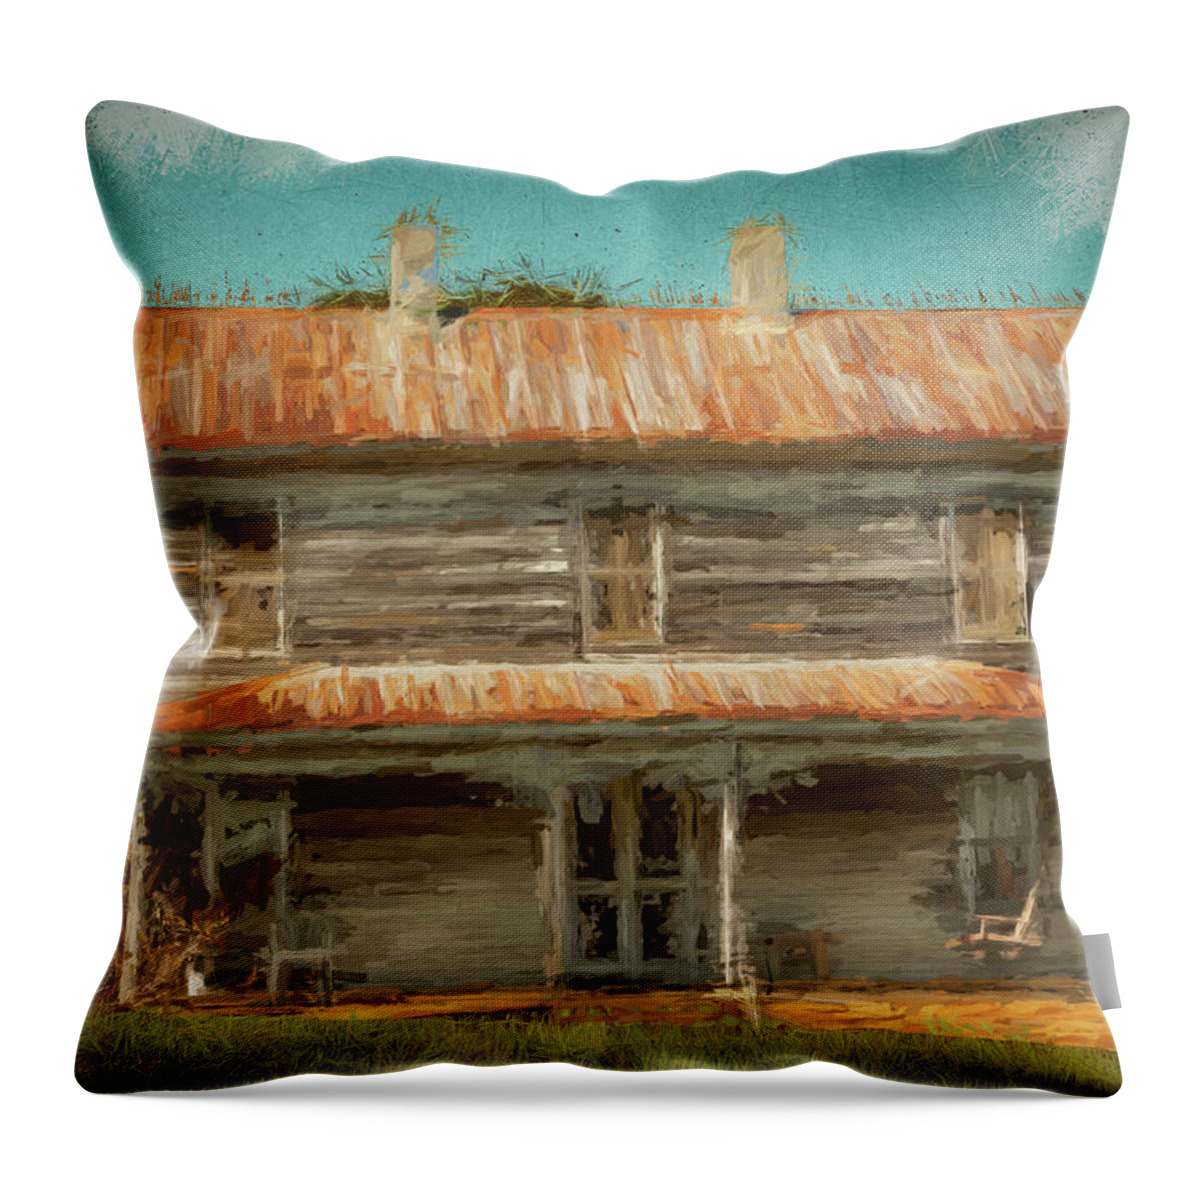 Mountains Throw Pillow featuring the photograph North Carolina Old Rural House ap 108 by Dan Carmichael